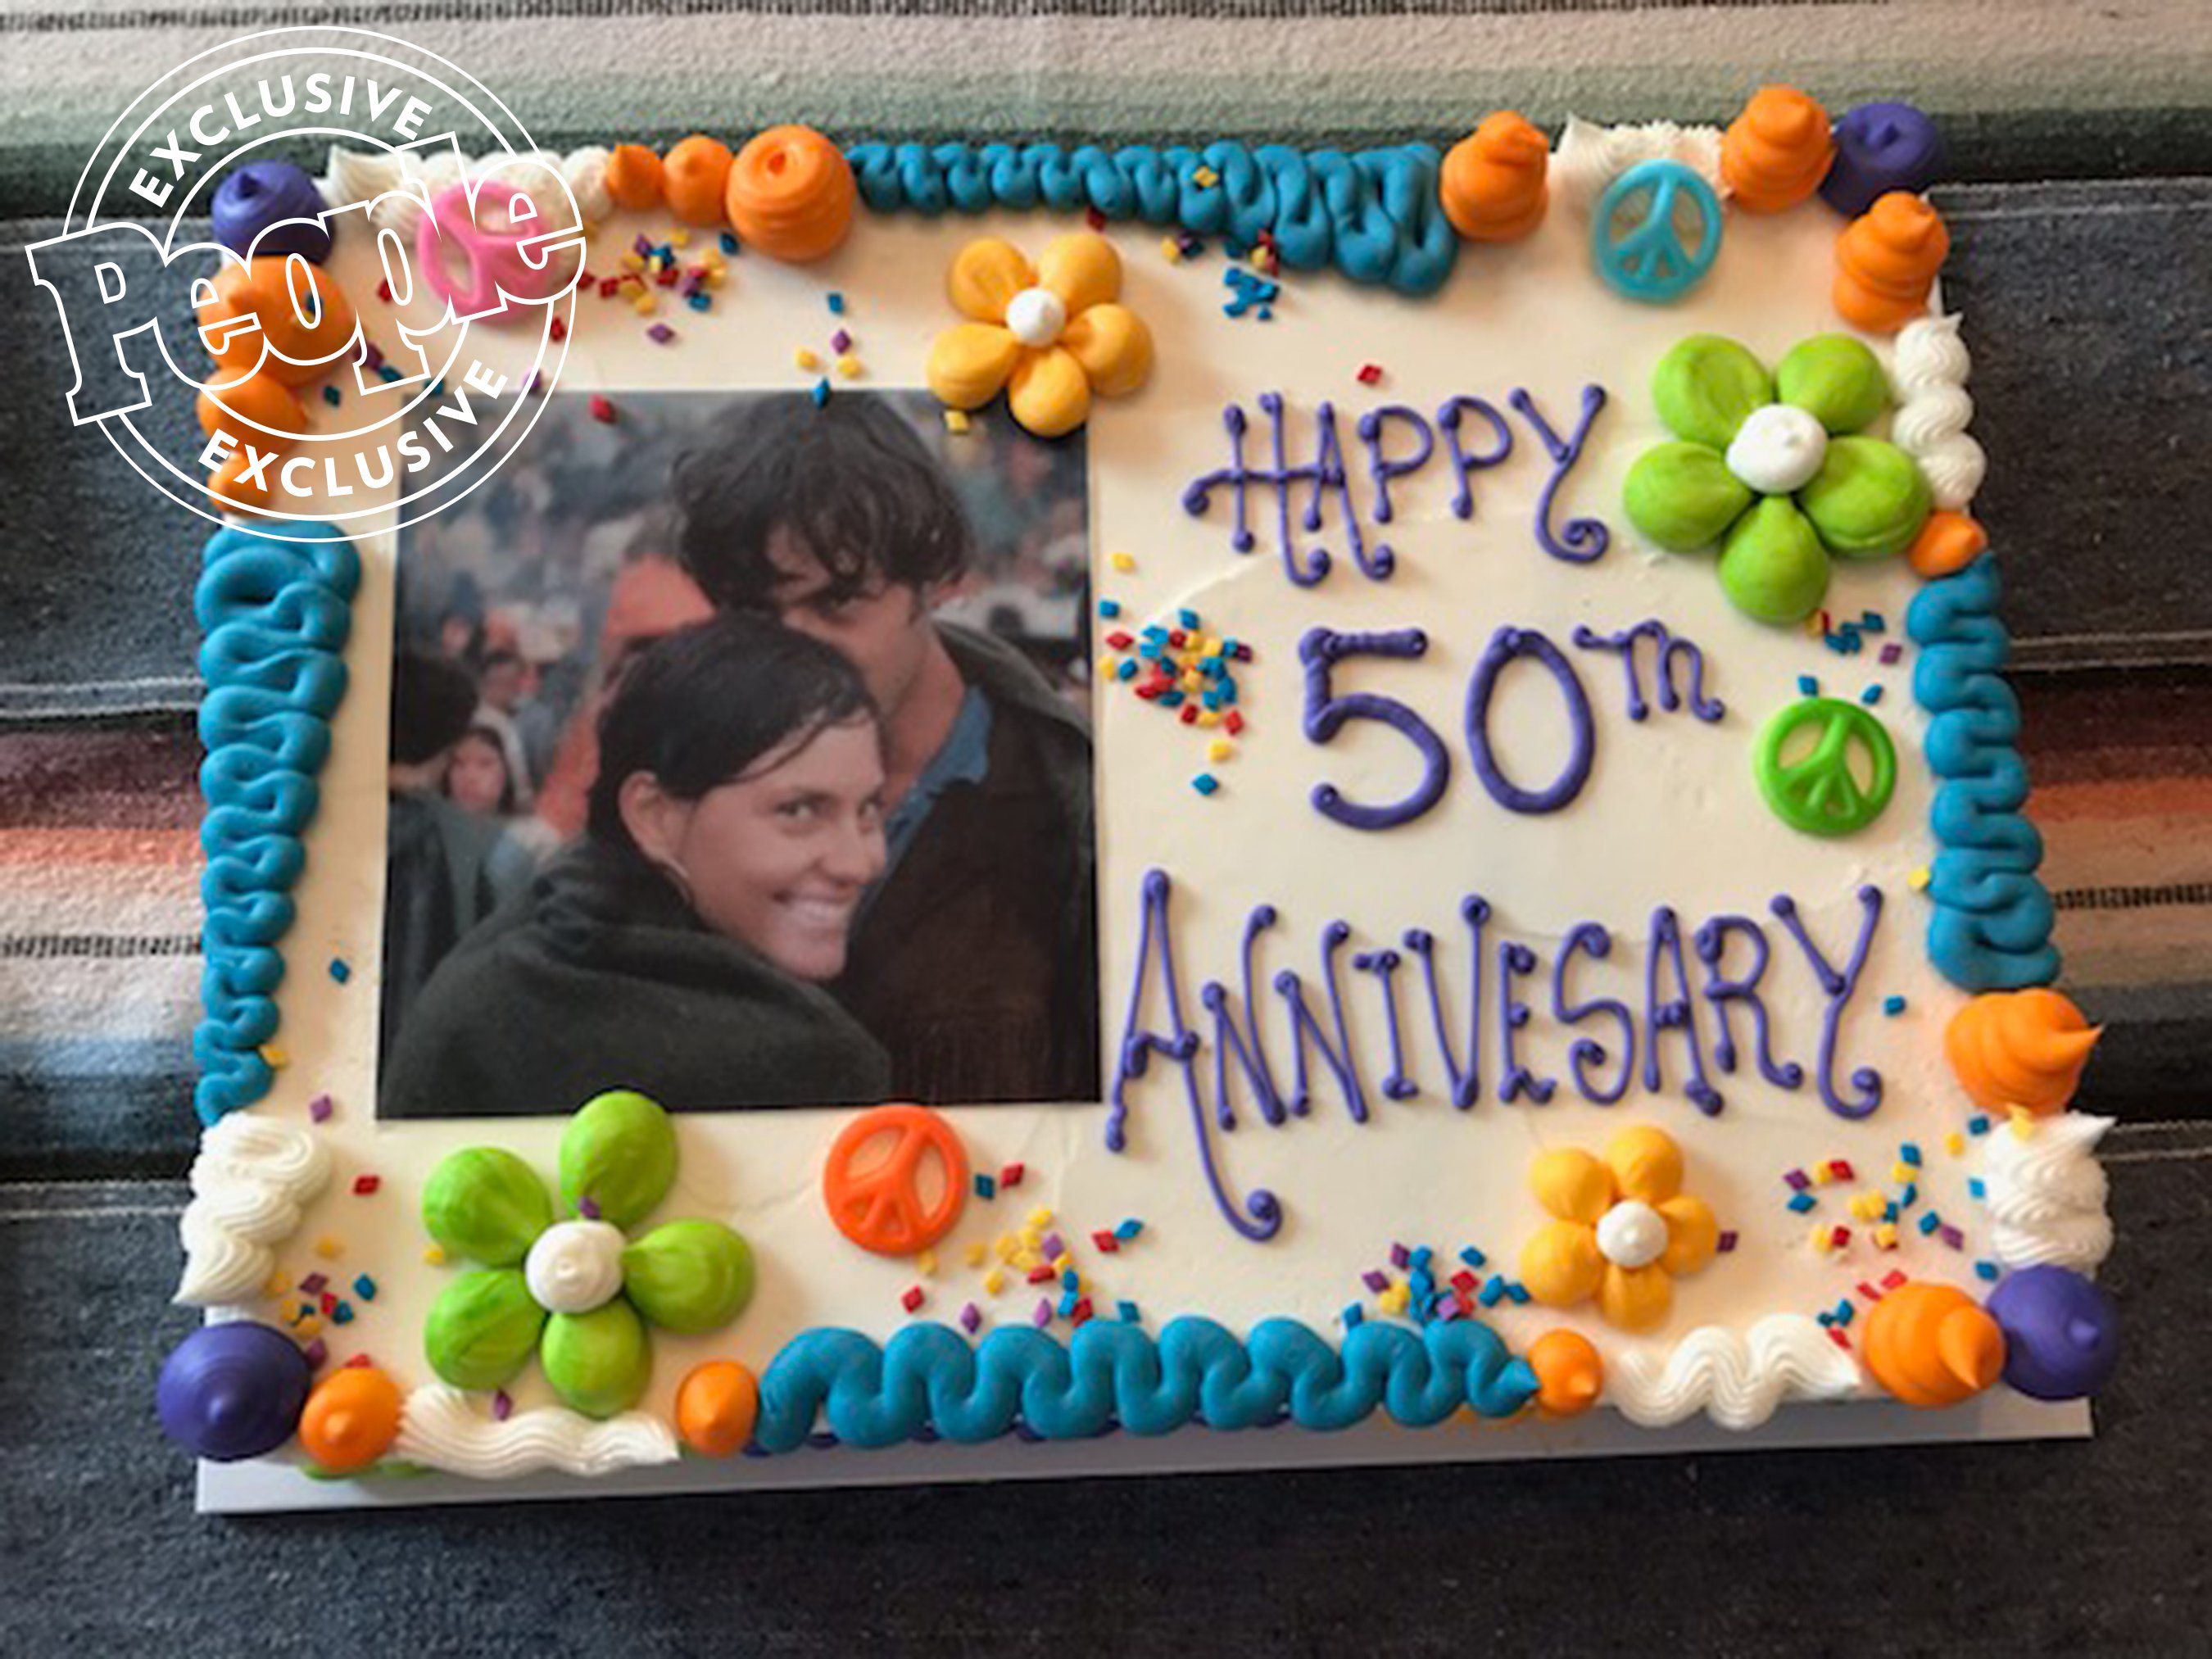 Couple Who Met at Woodstock Celebrates 50th Anniversary with Surprise Cake from Family